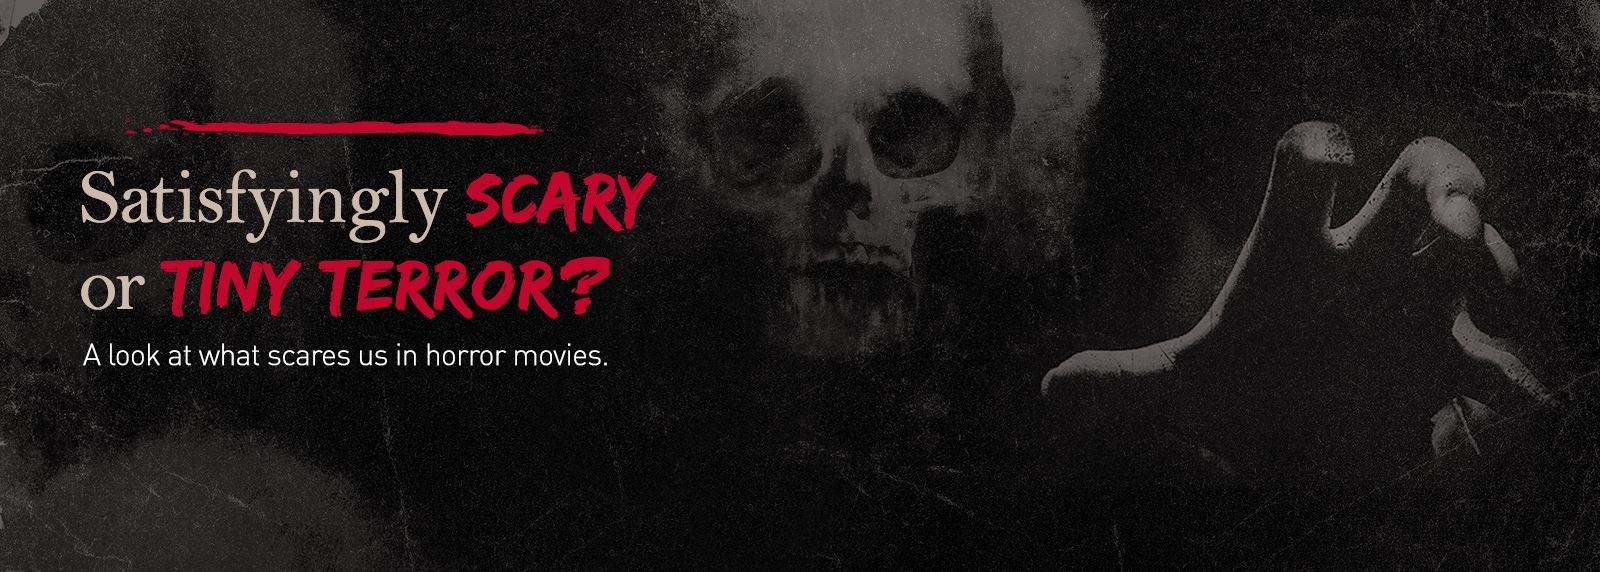 Horrorfest Watch Halloween Movies Online On Demand Available